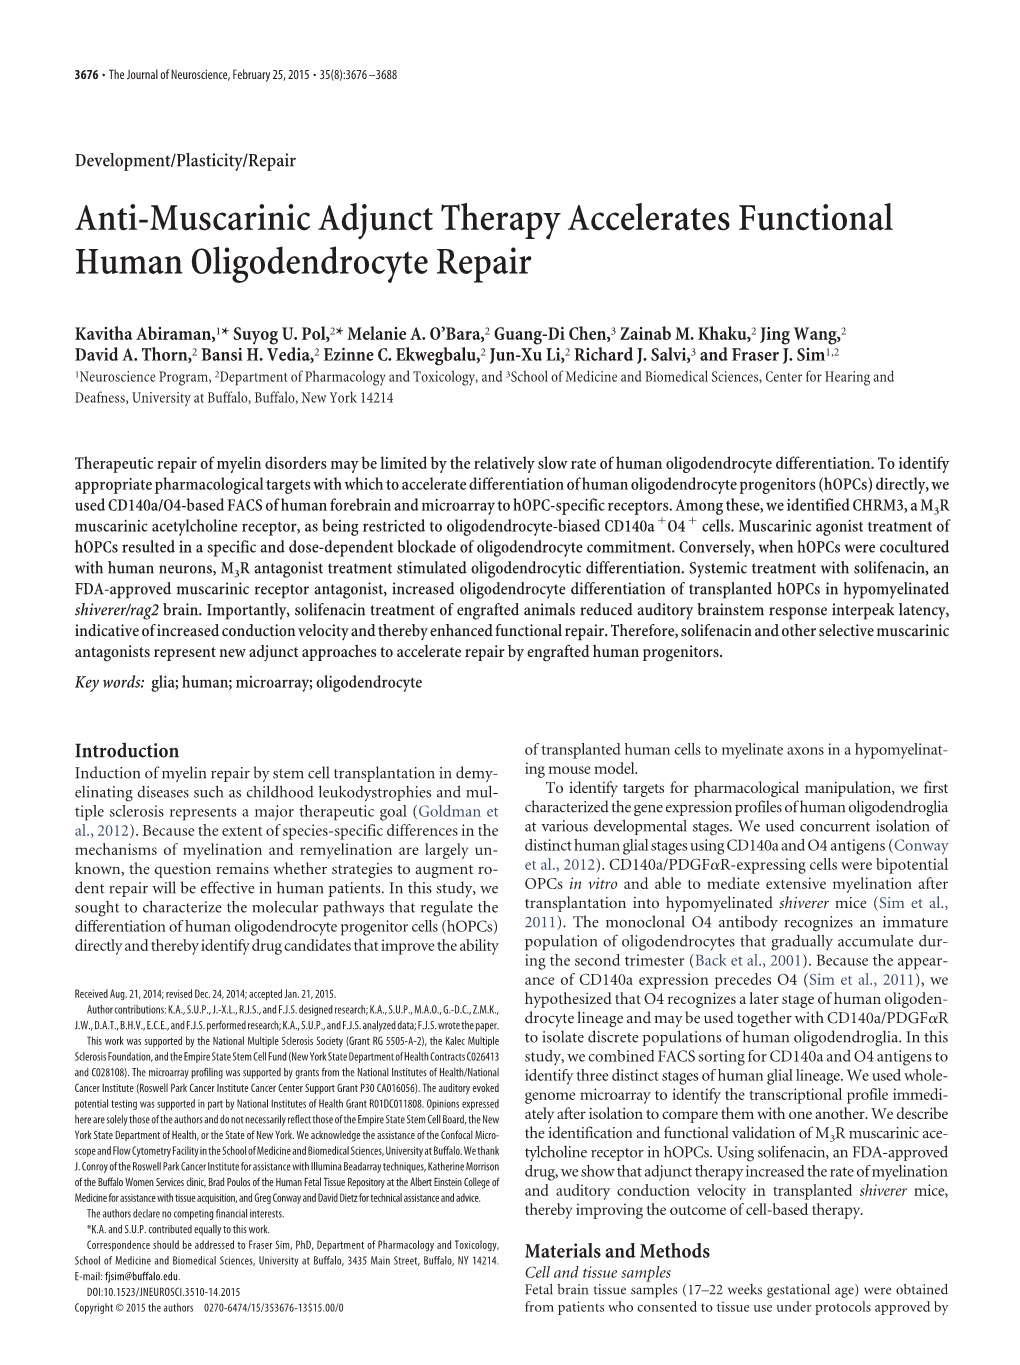 Anti-Muscarinic Adjunct Therapy Accelerates Functional Human Oligodendrocyte Repair